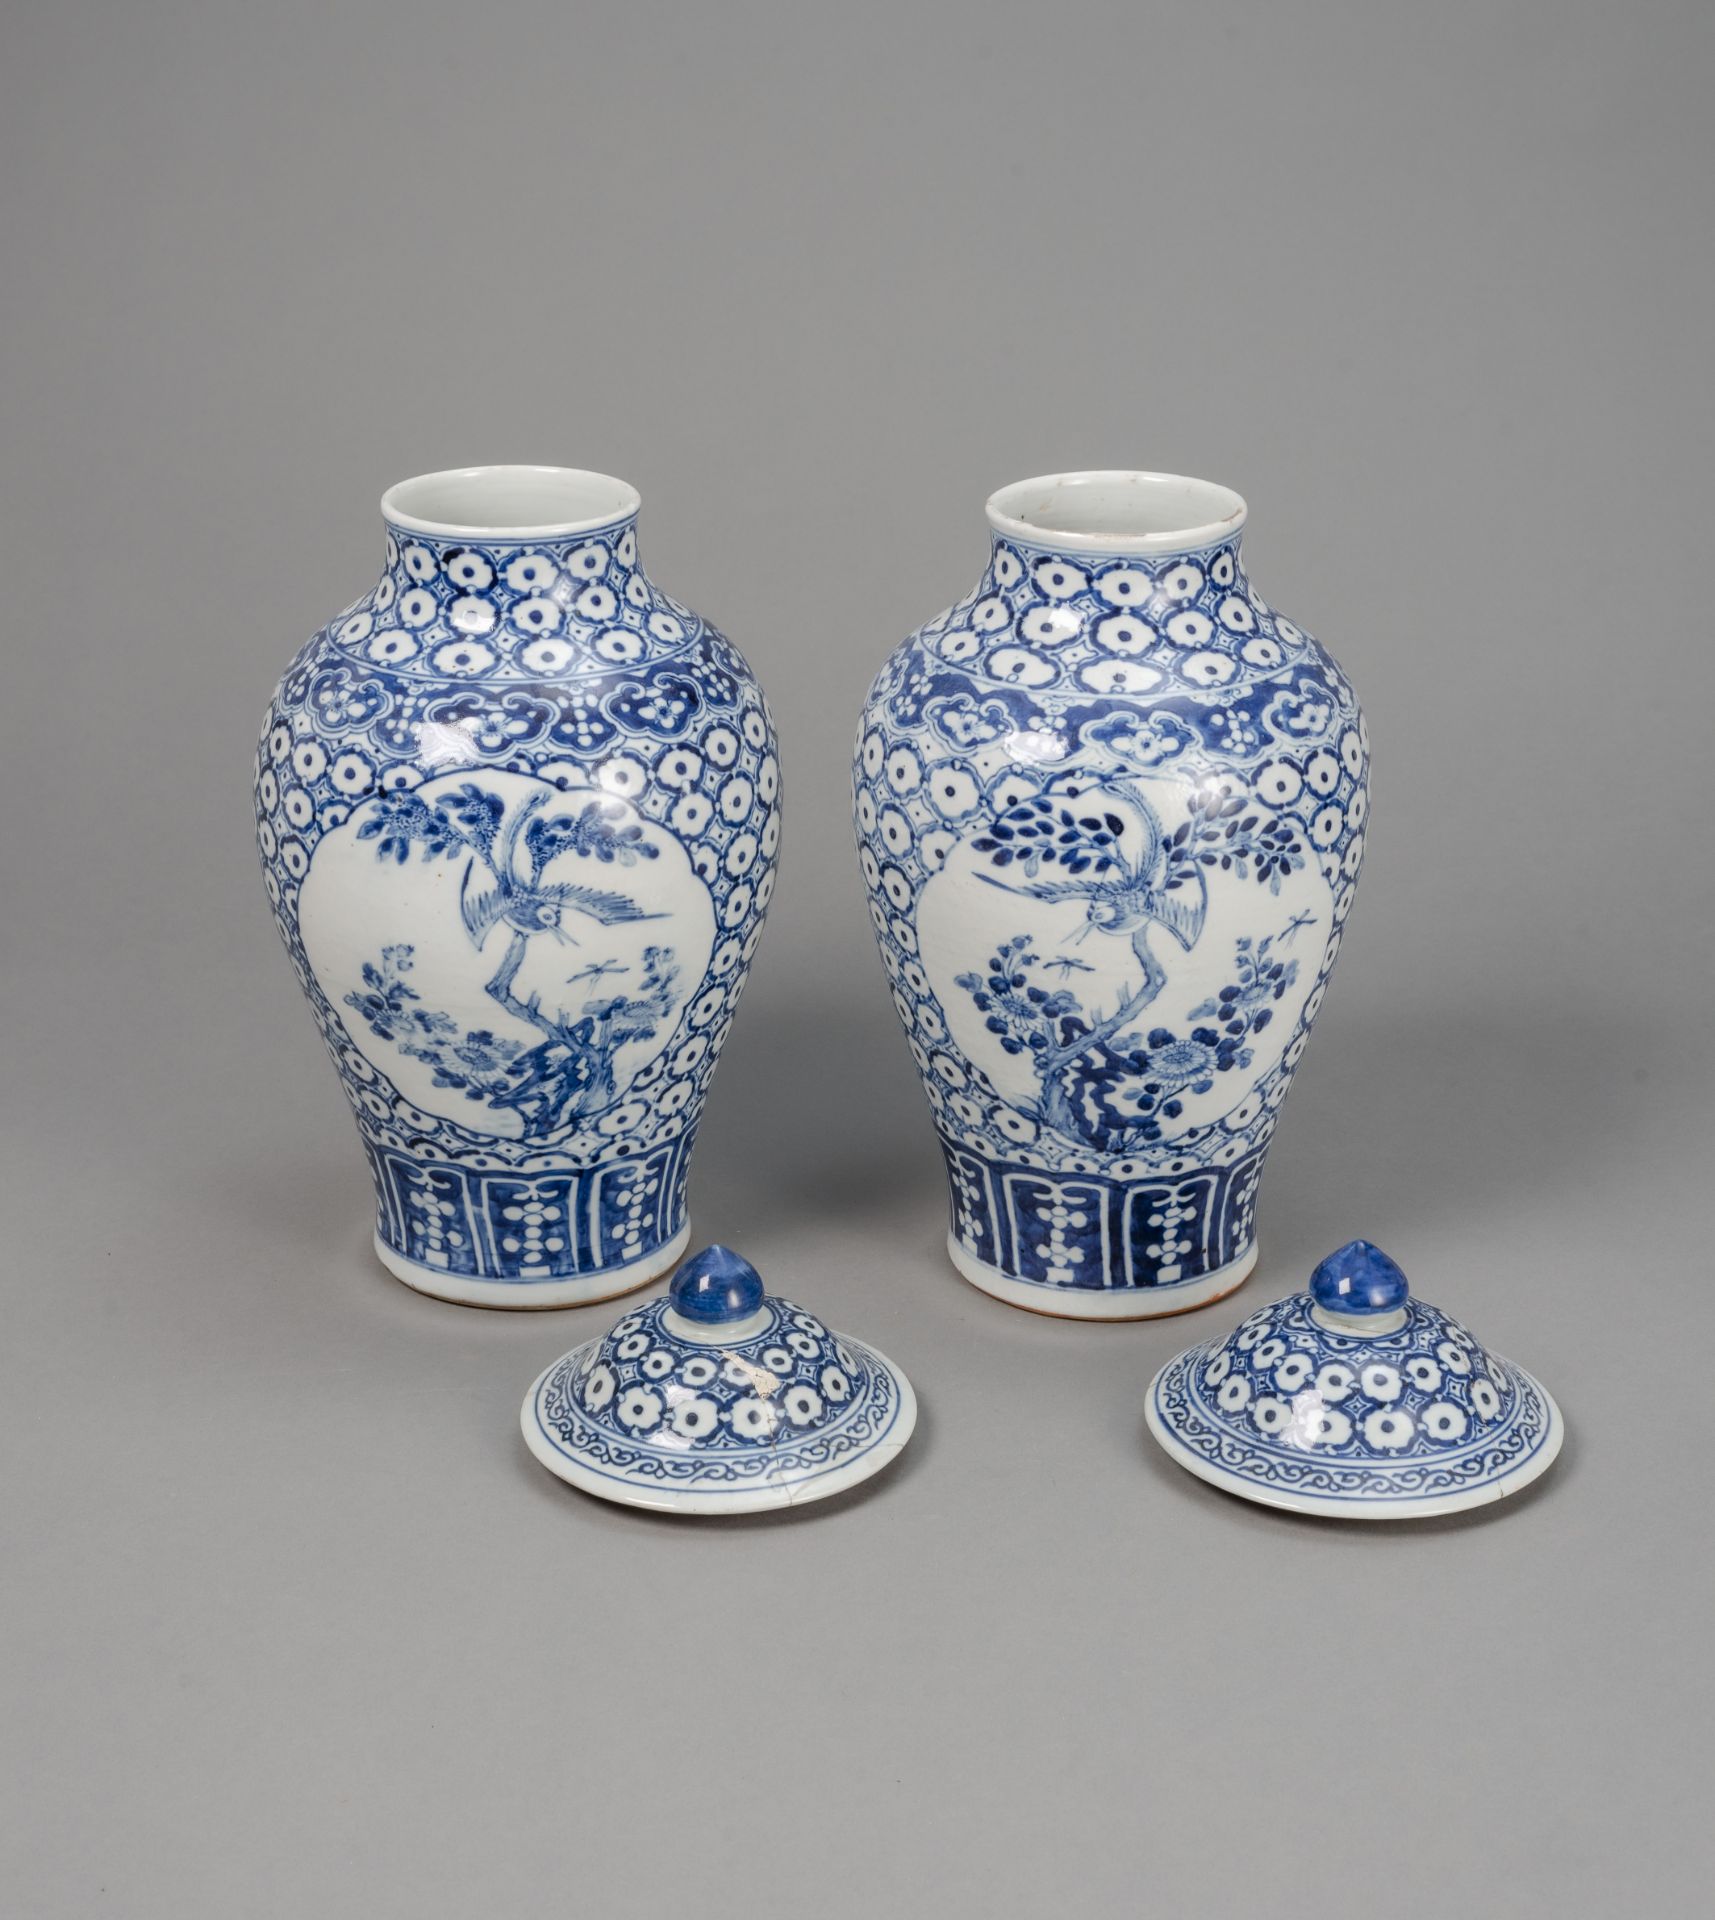 A PAIR OF UNDERGLAZE-BLUE PAINTED PORCELAIN VASES WITH COVERS - Image 2 of 3